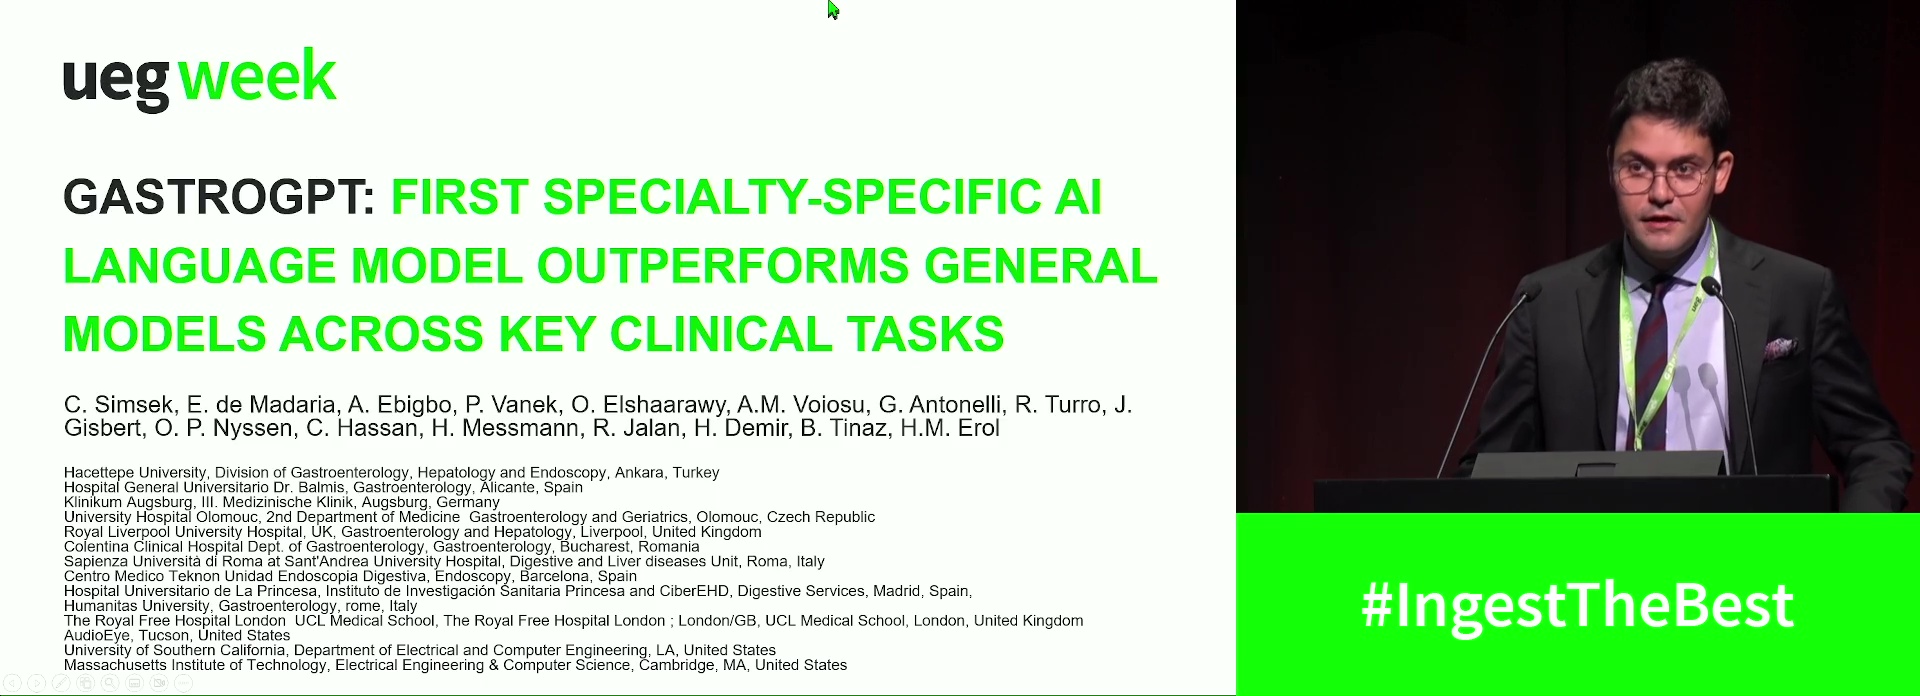 GASTROGPT: FIRST SPECIALTY-SPECIFIC AI LANGUAGE MODEL OUTPERFORMS GENERAL MODELS ACROSS KEY CLINICAL TASKS